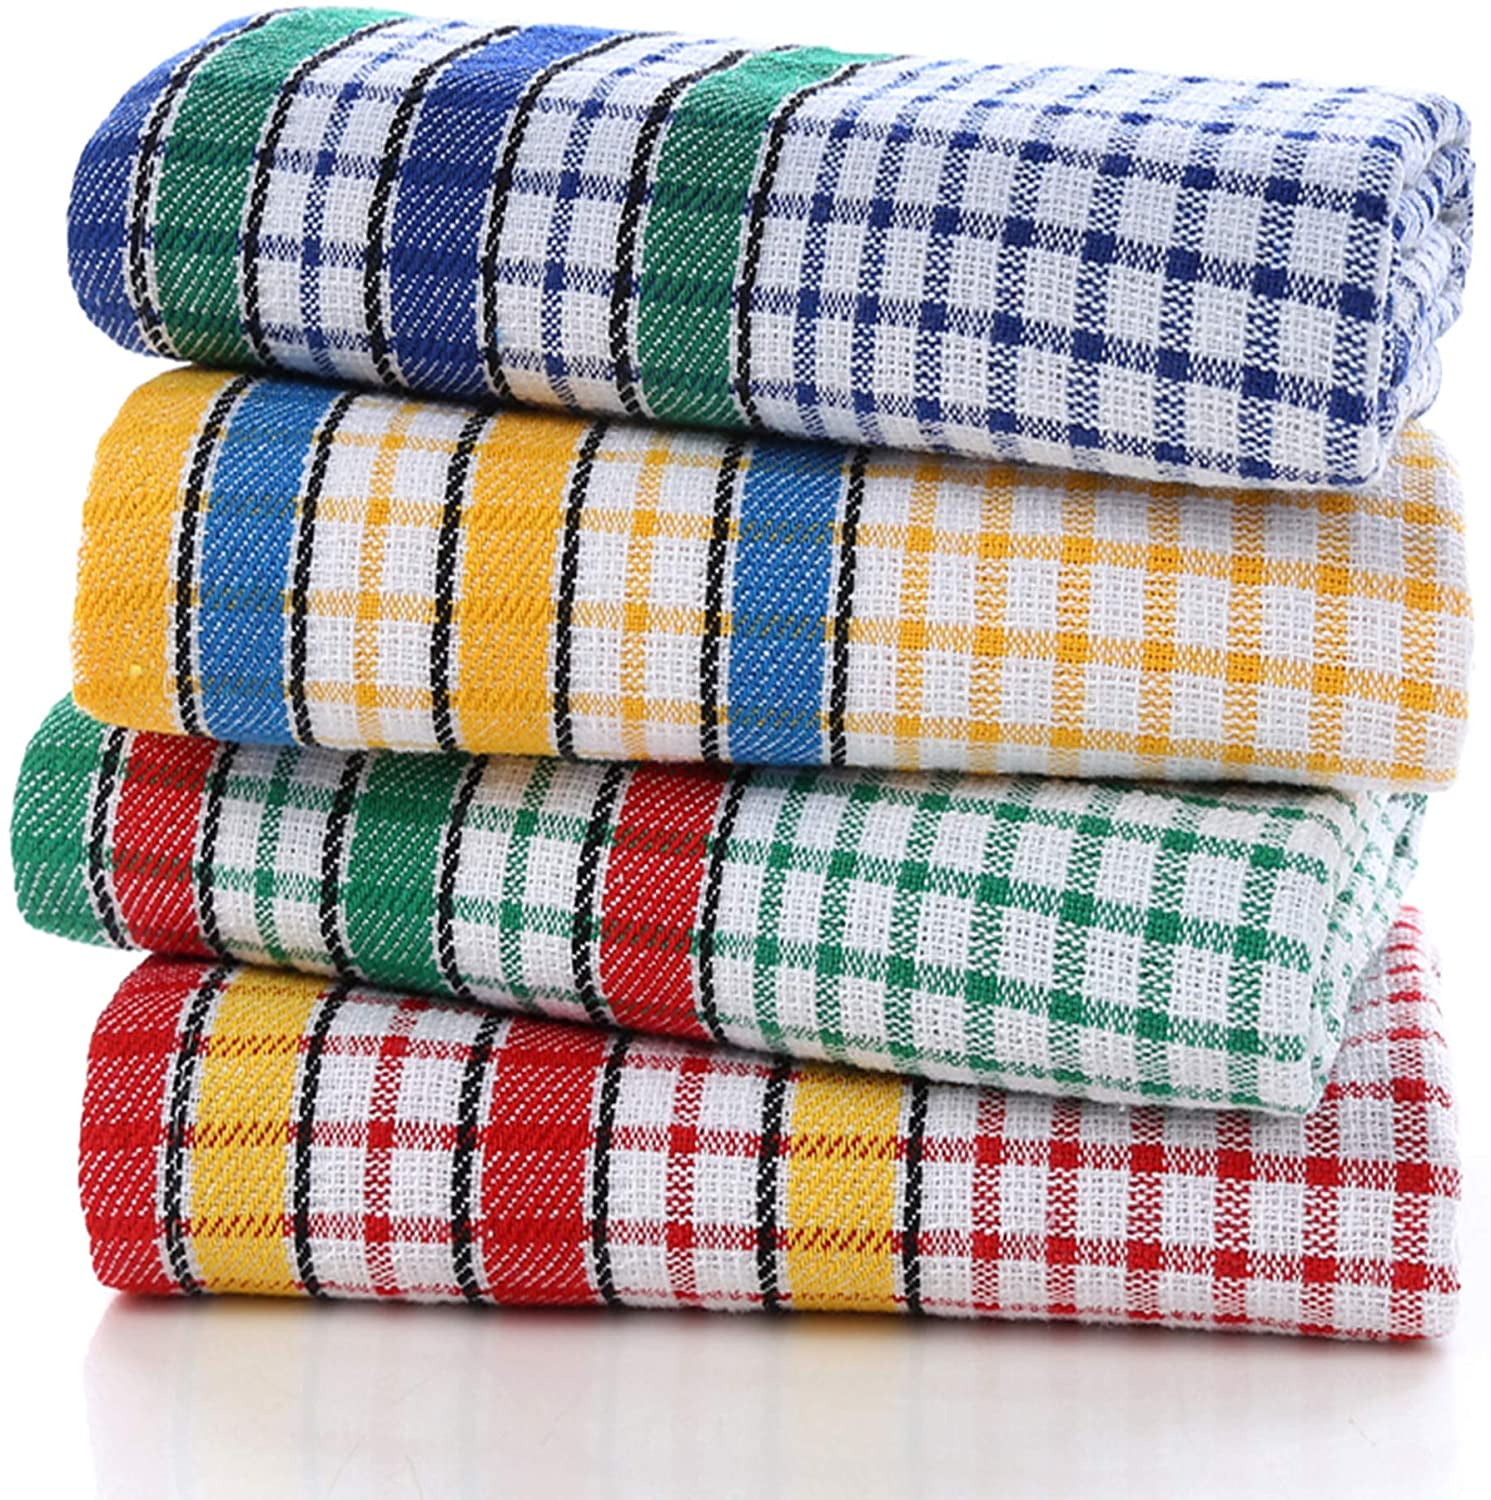 Kitchen Dish Towels, 16 Inch x 25 Inch Bulk Cotton Kitchen Towels and  Dishcloths Set, 6 Pack Dish Cloths for Washing Dishes - AliExpress